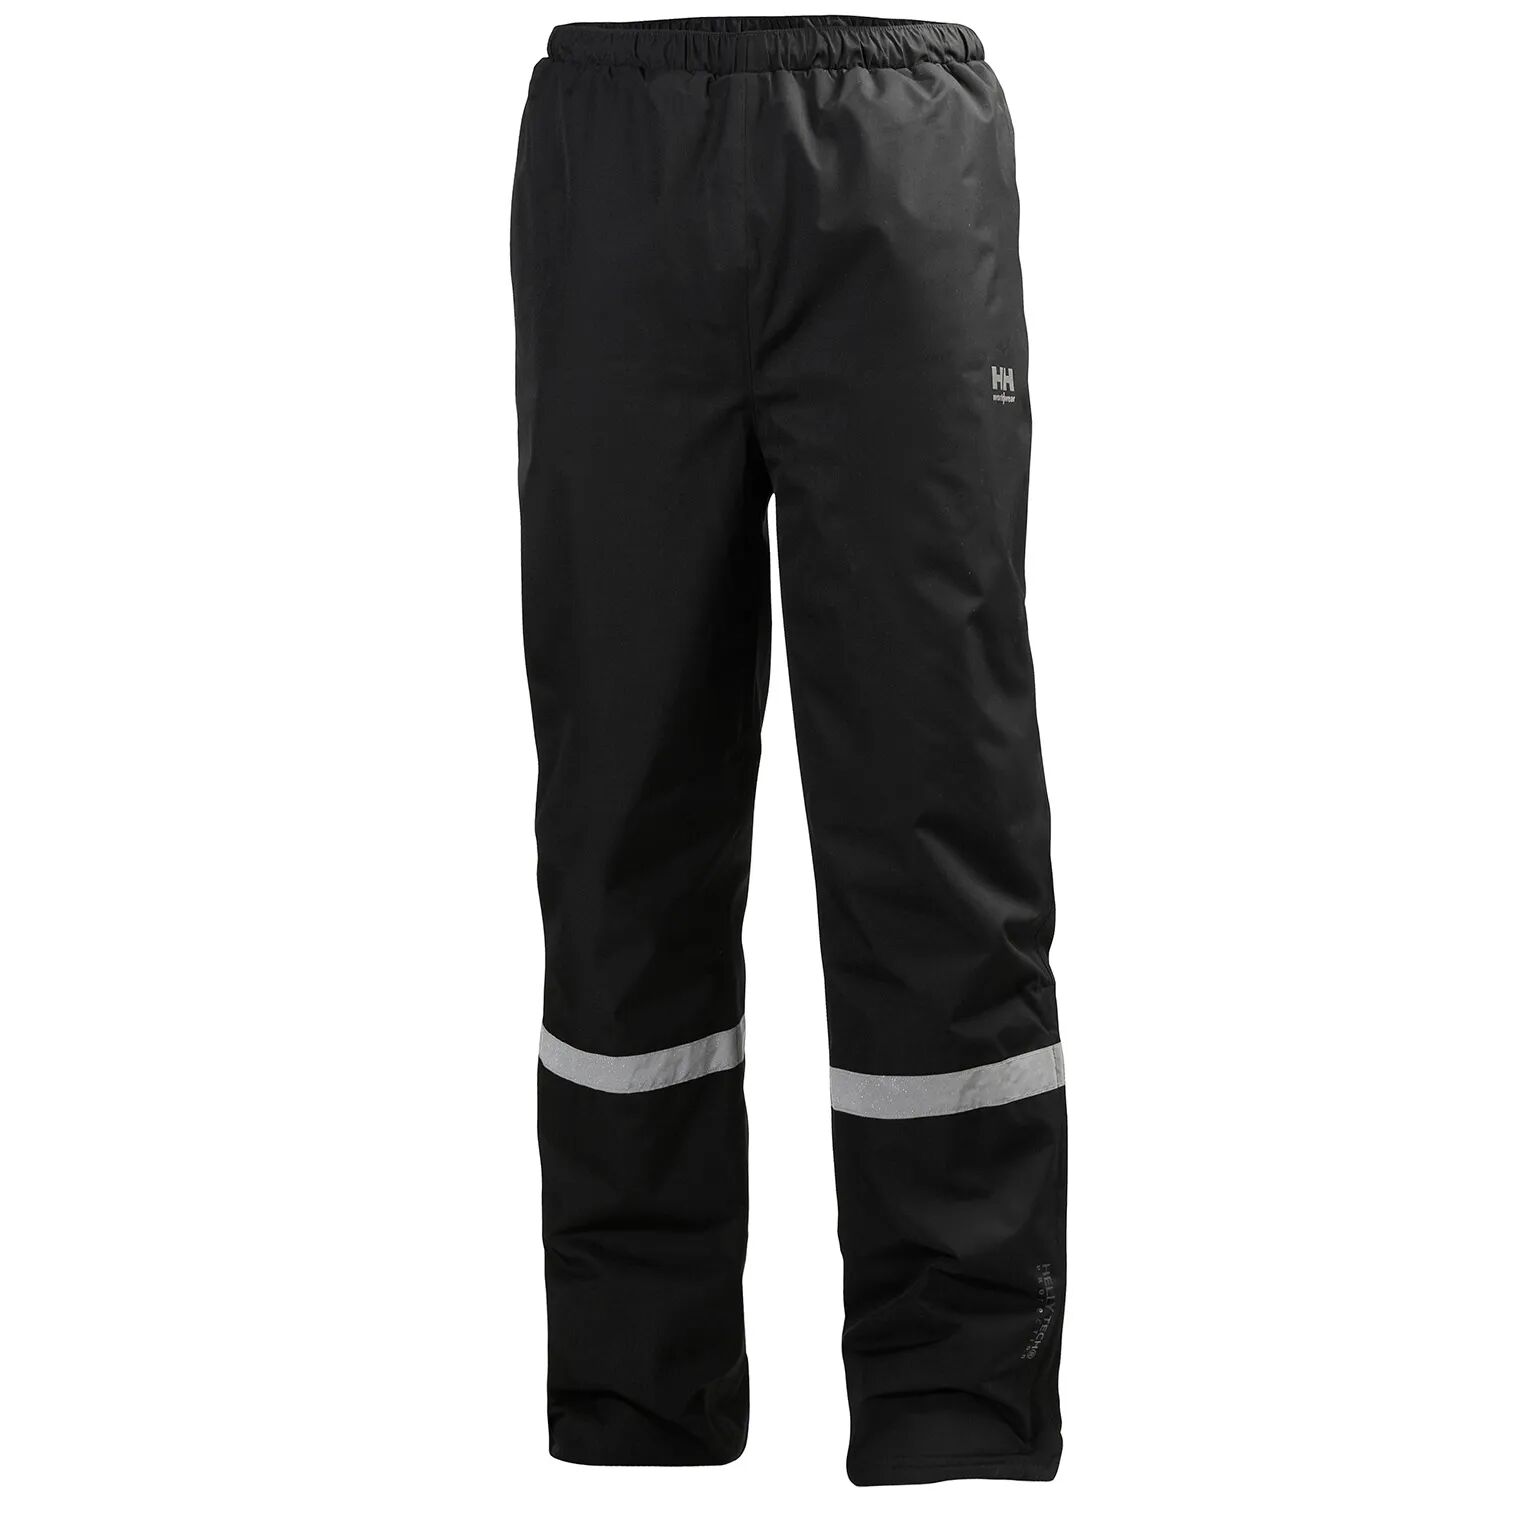 HH Workwear Helly Hansen WorkwearManchester Primaloft Insulated Protective Winter Pants Black L